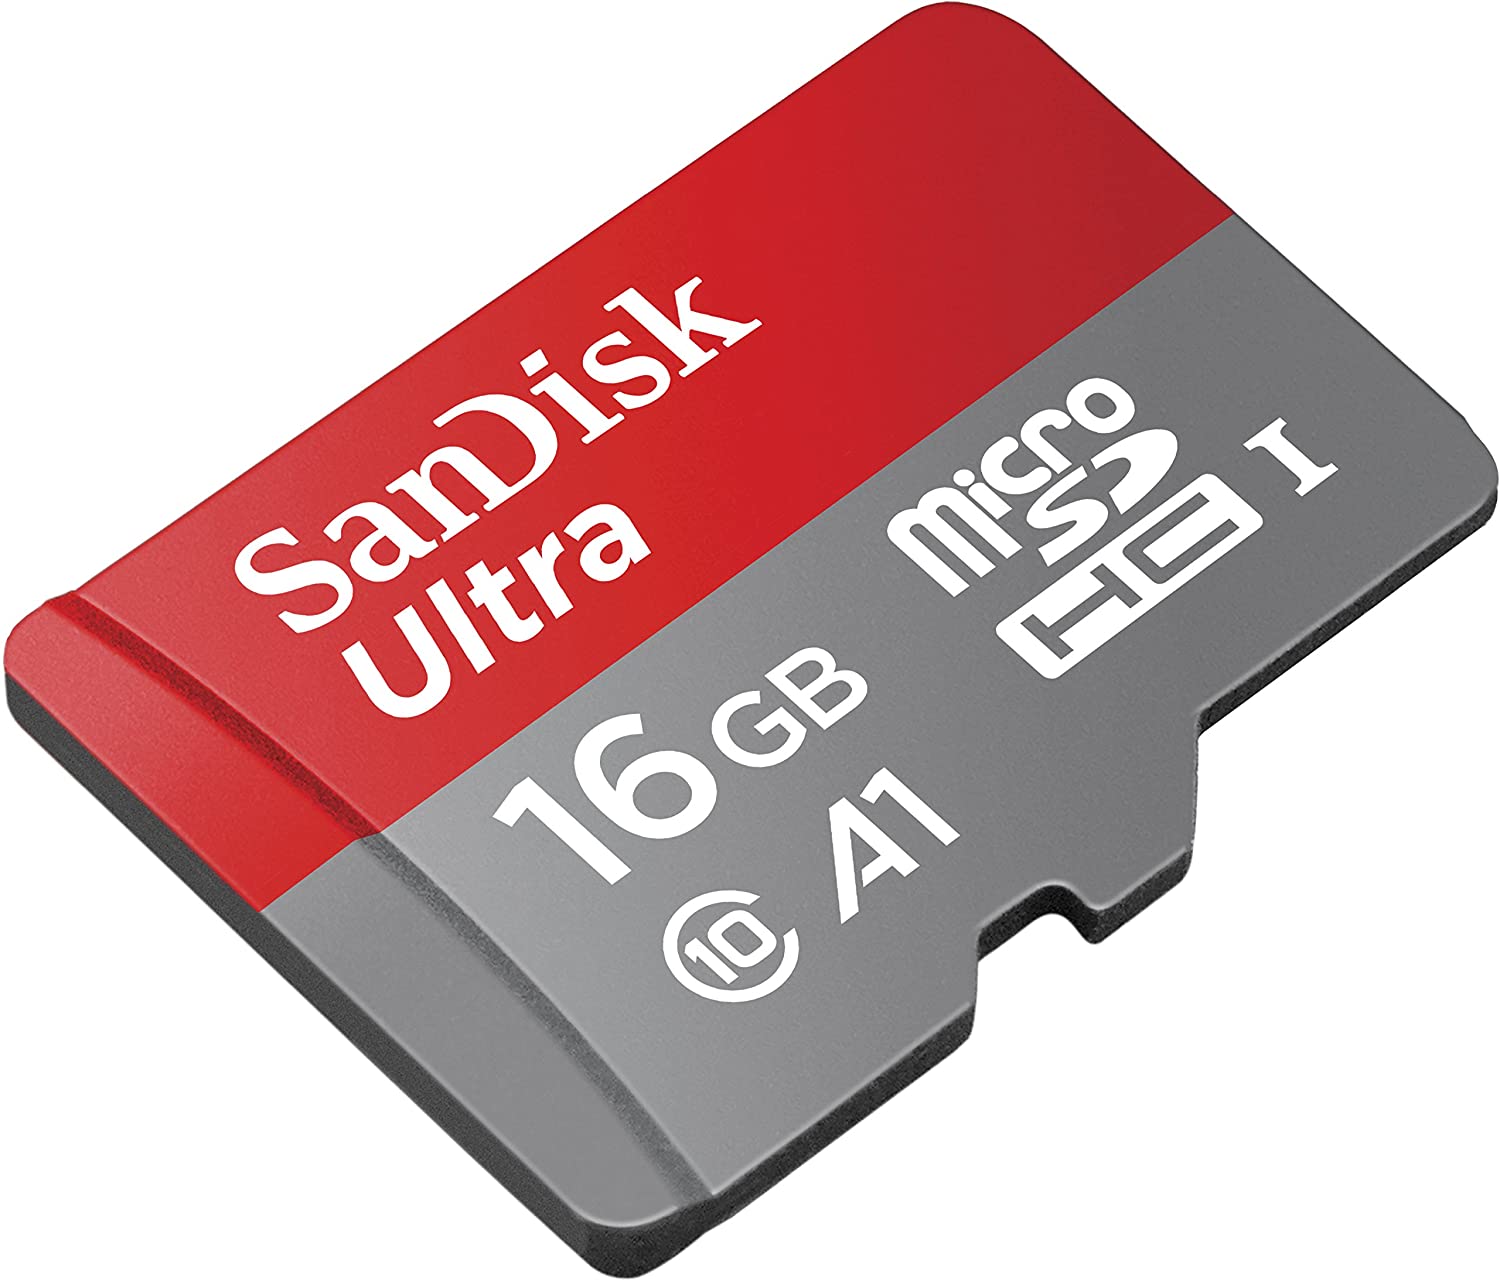 Sandisk Ultra 16GB Micro SDHC UHS-I Card with Adapter 98MB/s